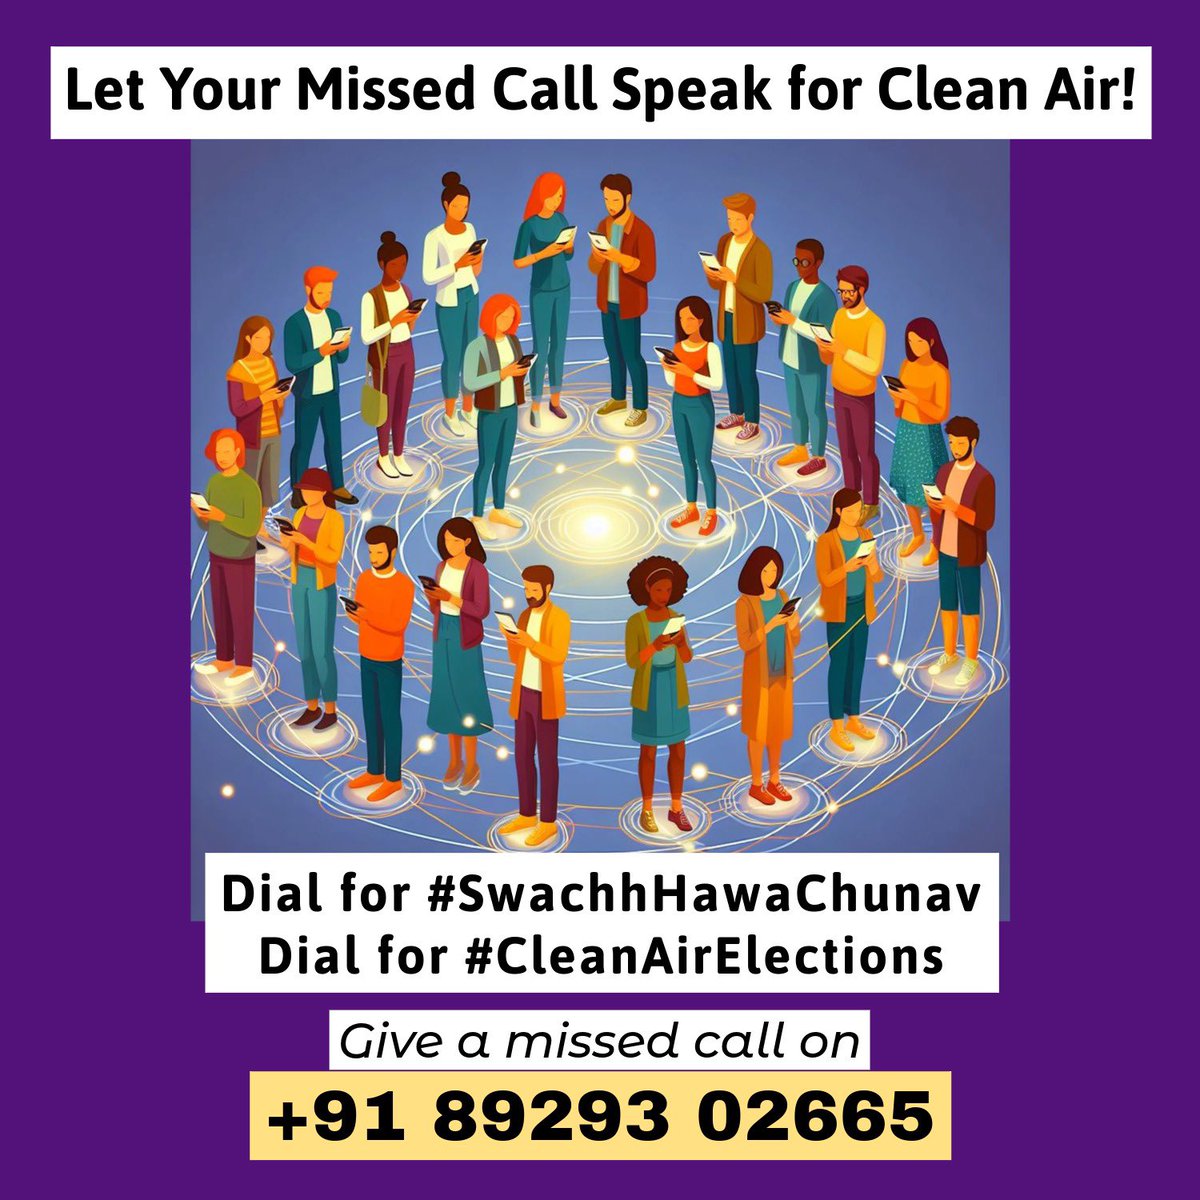 I am among the 41,000 parents who are demanding #cleanair for our children. 

Have you urged your political candidates for 
#SwachhHawaChunav #CleanAirElections yet?

@TJhumroo @banegaswasthind